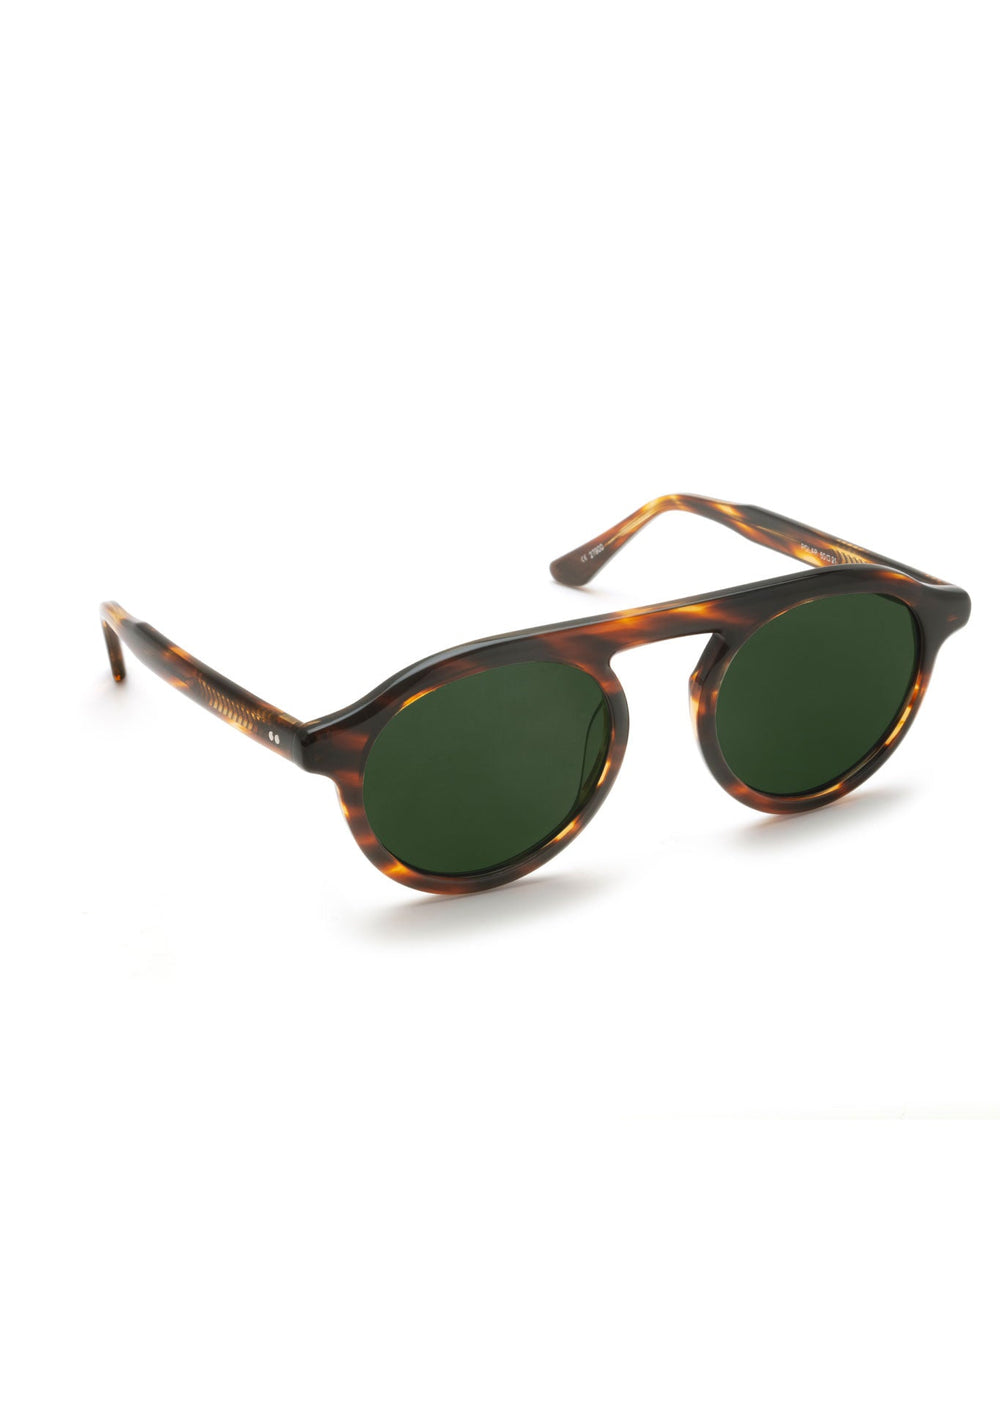 KREWE SUNGLASSES - CAMERON | Hickory Polarized handcrafted, luxury brown acetate round sunglasses